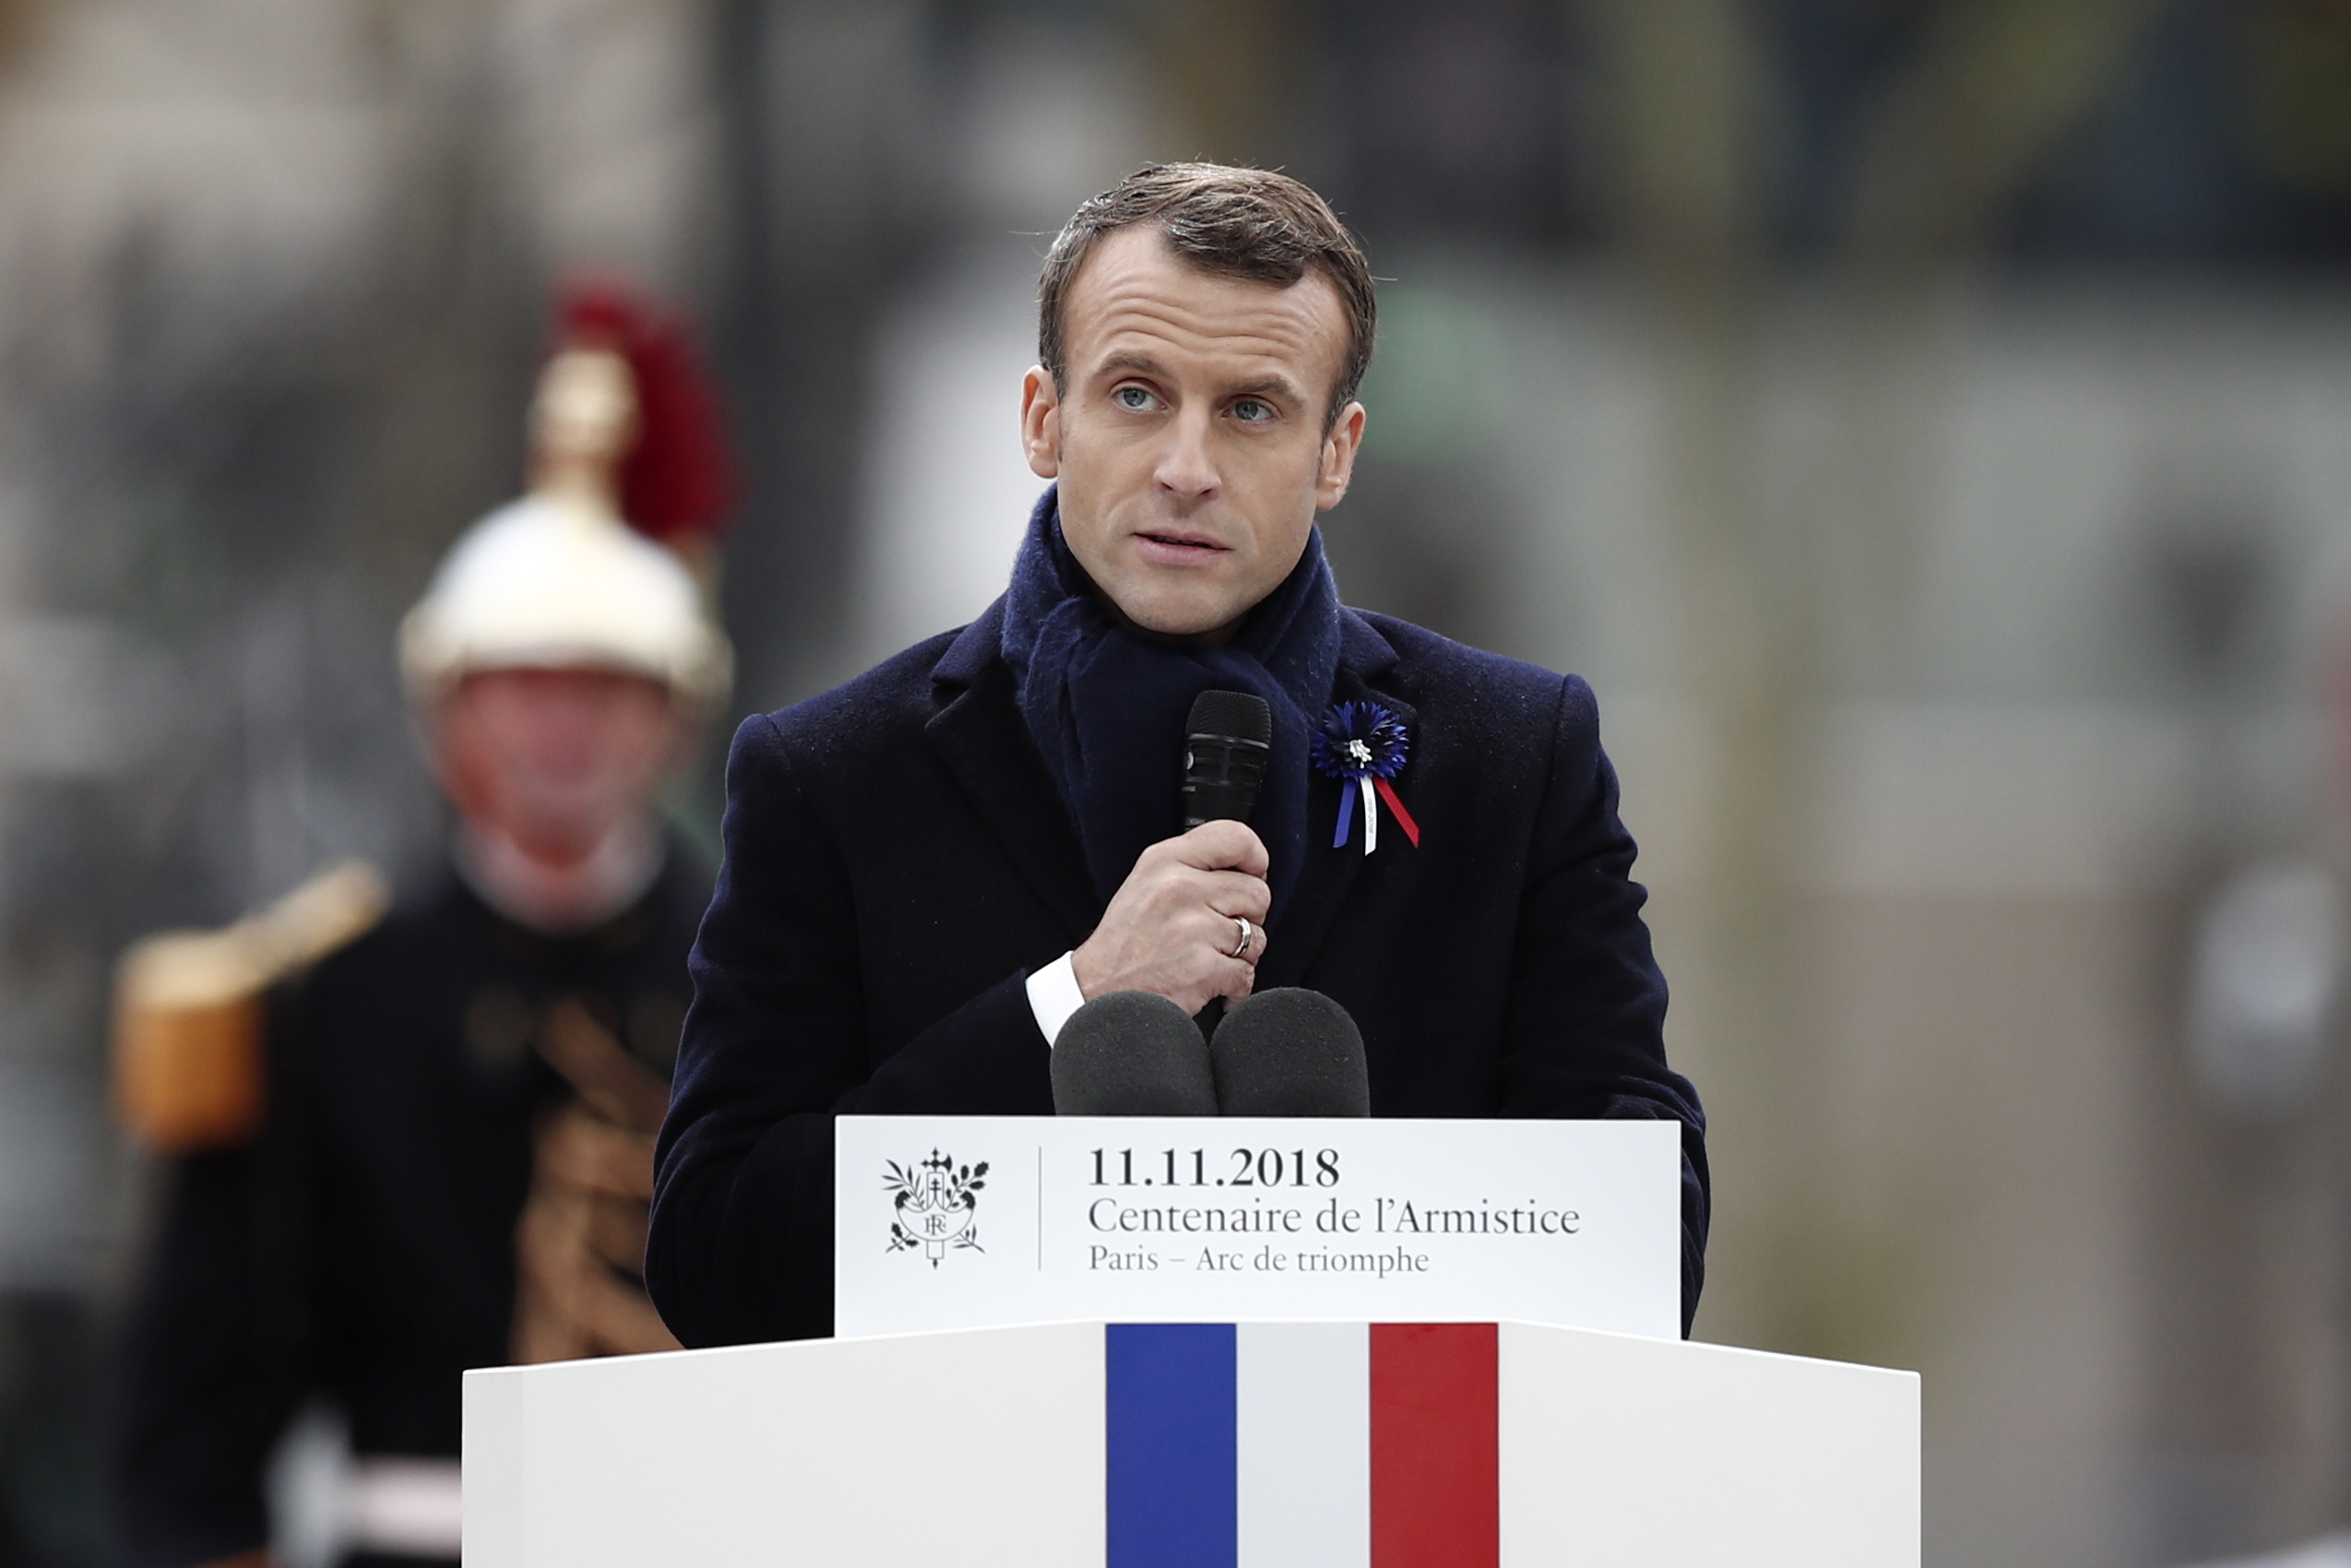 epa07157720 French President Emmanuel Macron delivers his speech during the international ceremony for the Centenary of the WWI Armistice of 11 November 1918 at the Arc de Triomphe, in Paris, France, 11 November 2018. Heads of State and Government commemorate their fallen soldiers in France.  EPA/FRANCOIS MORI / POOL MAXPPP OUT